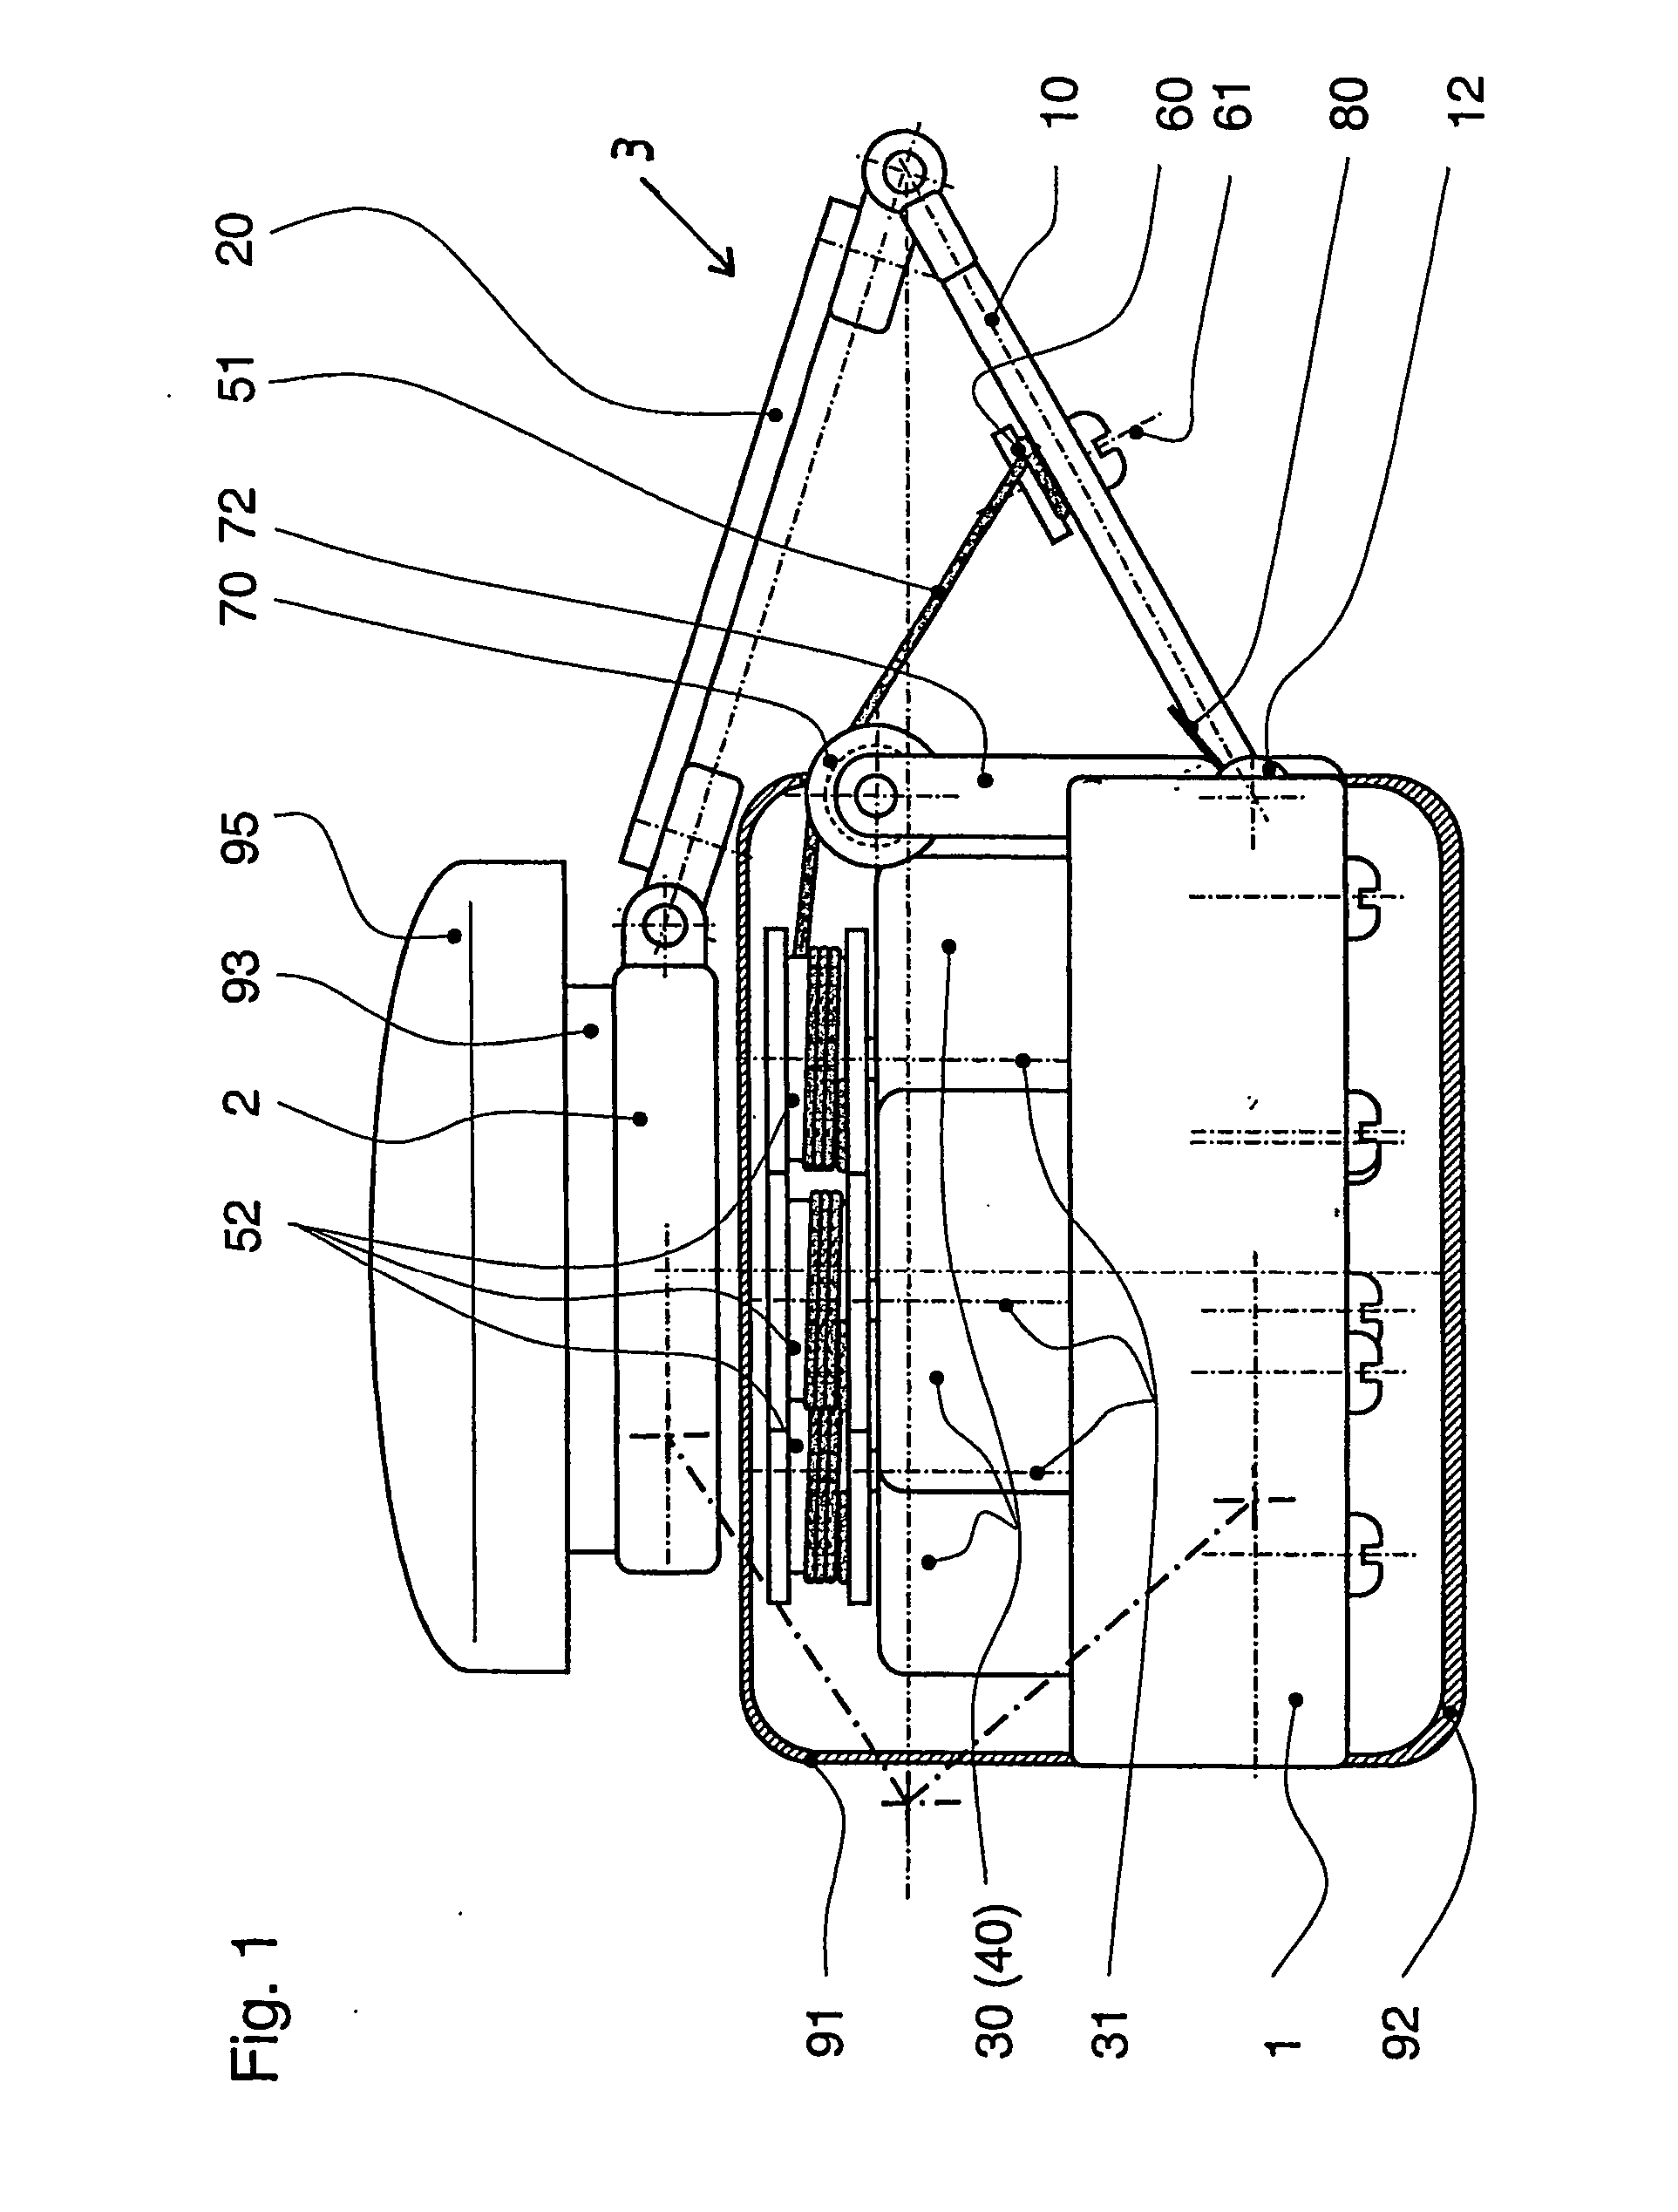 Device for transmitting a movement having a parallel kinematics transmission structure providing three translational degrees of freedom